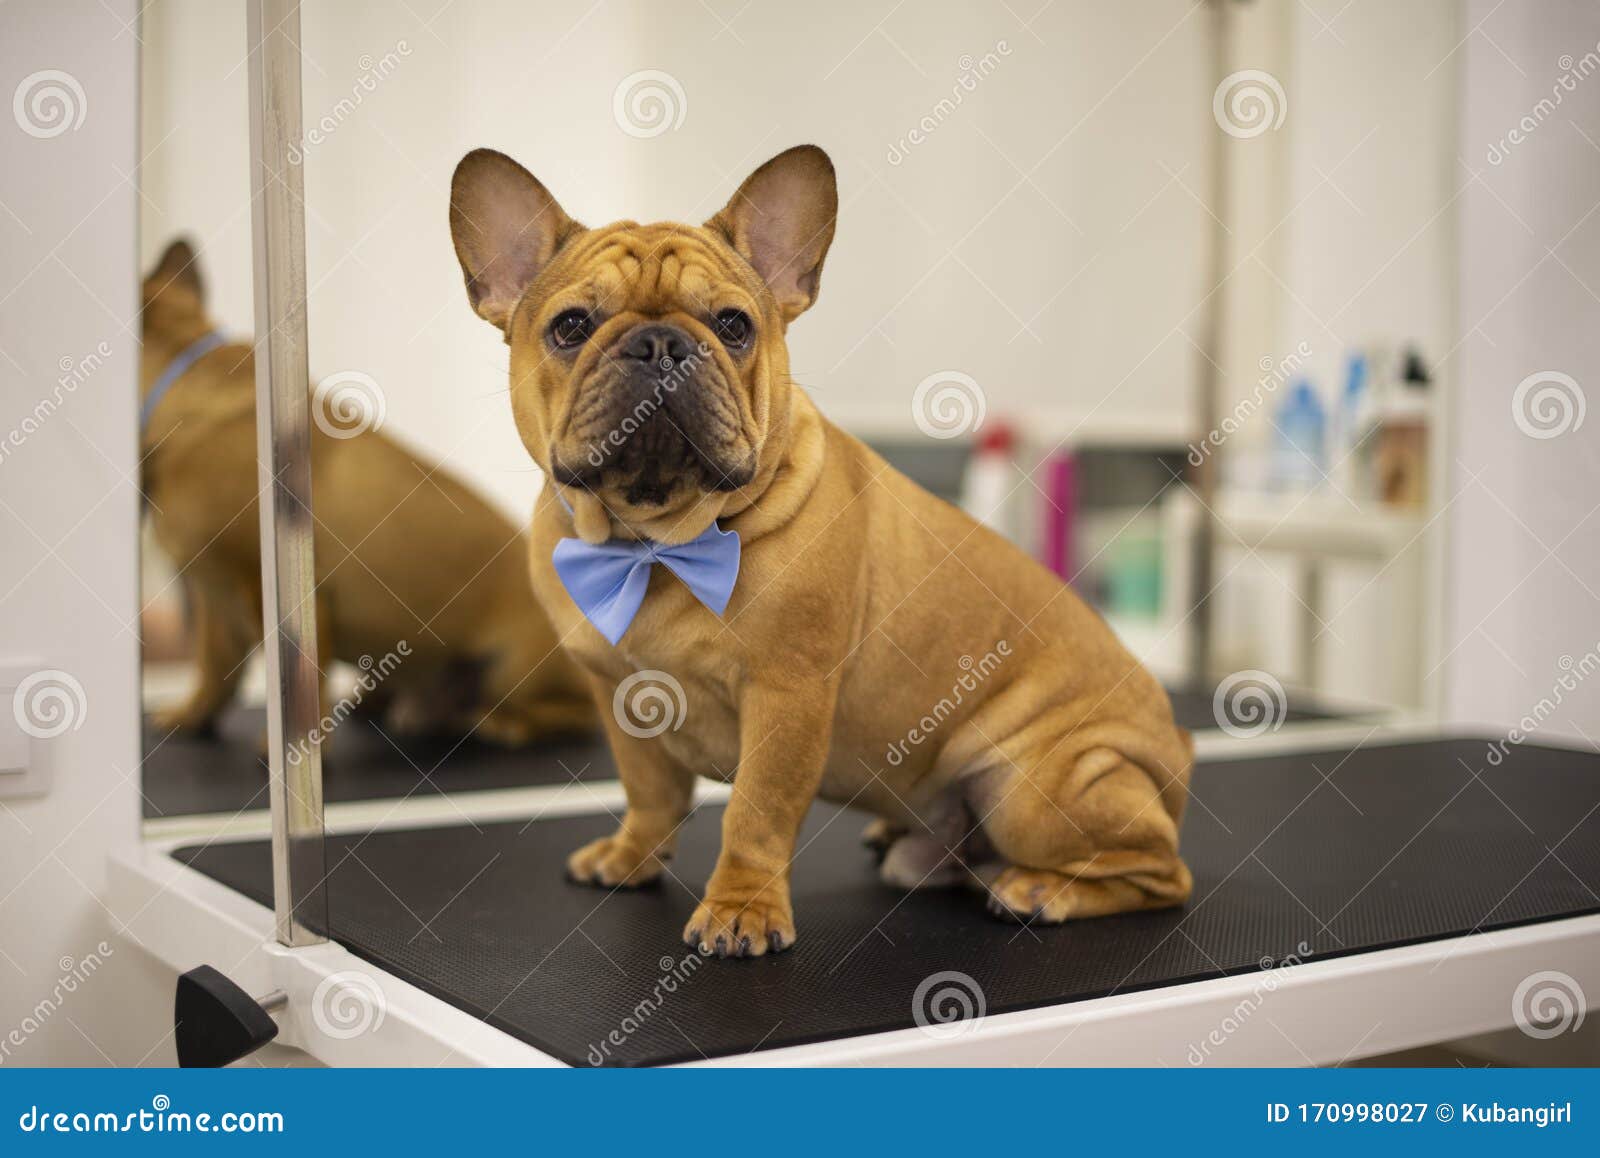 French Bulldog In Grooming Salon Stock Image Image of